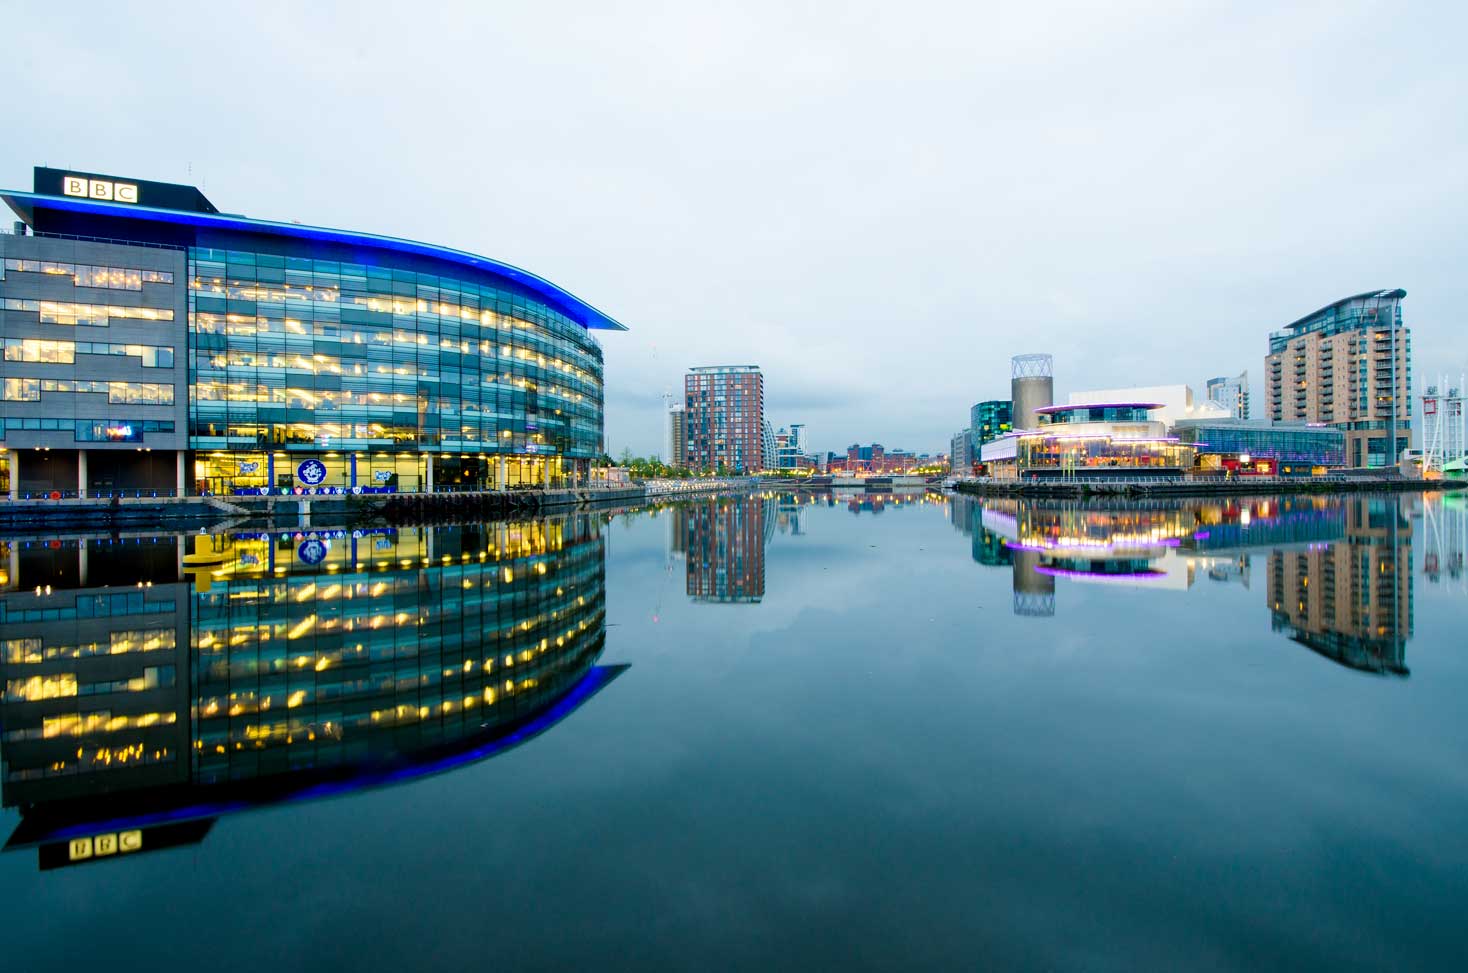 Photograph of Salford Quays Featuring the BBC Building Reflected onto the Quays